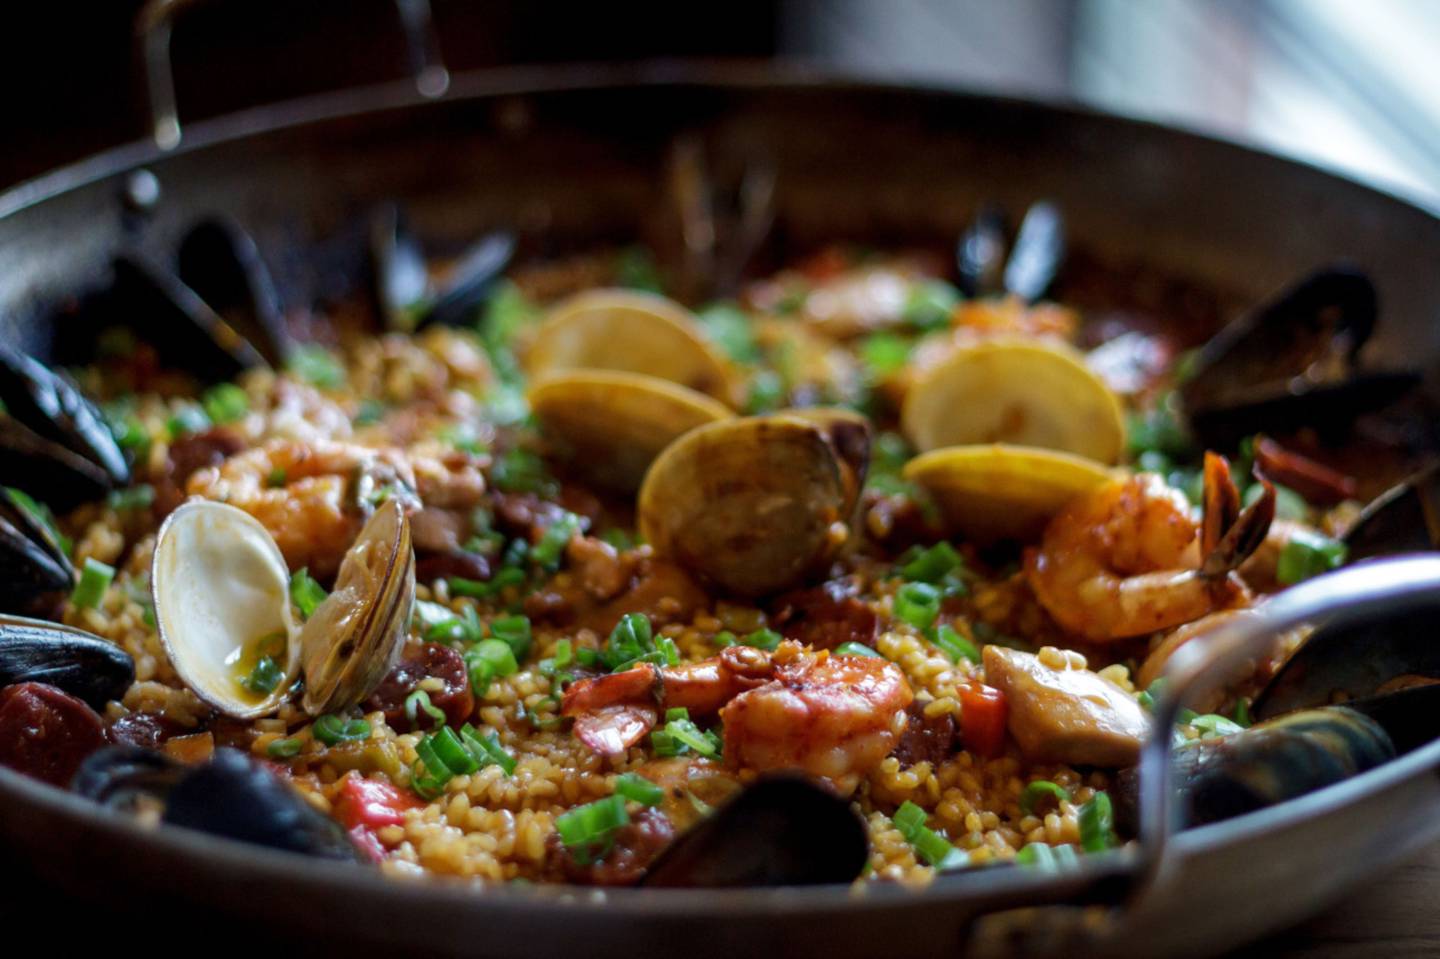 Spaniards paid more to cook their beloved paella in January as the price of rice, oil and seafood continued to climb strongly even after the government slashed taxes on food staples. Photographer: Philip Lewis/Bloomberg